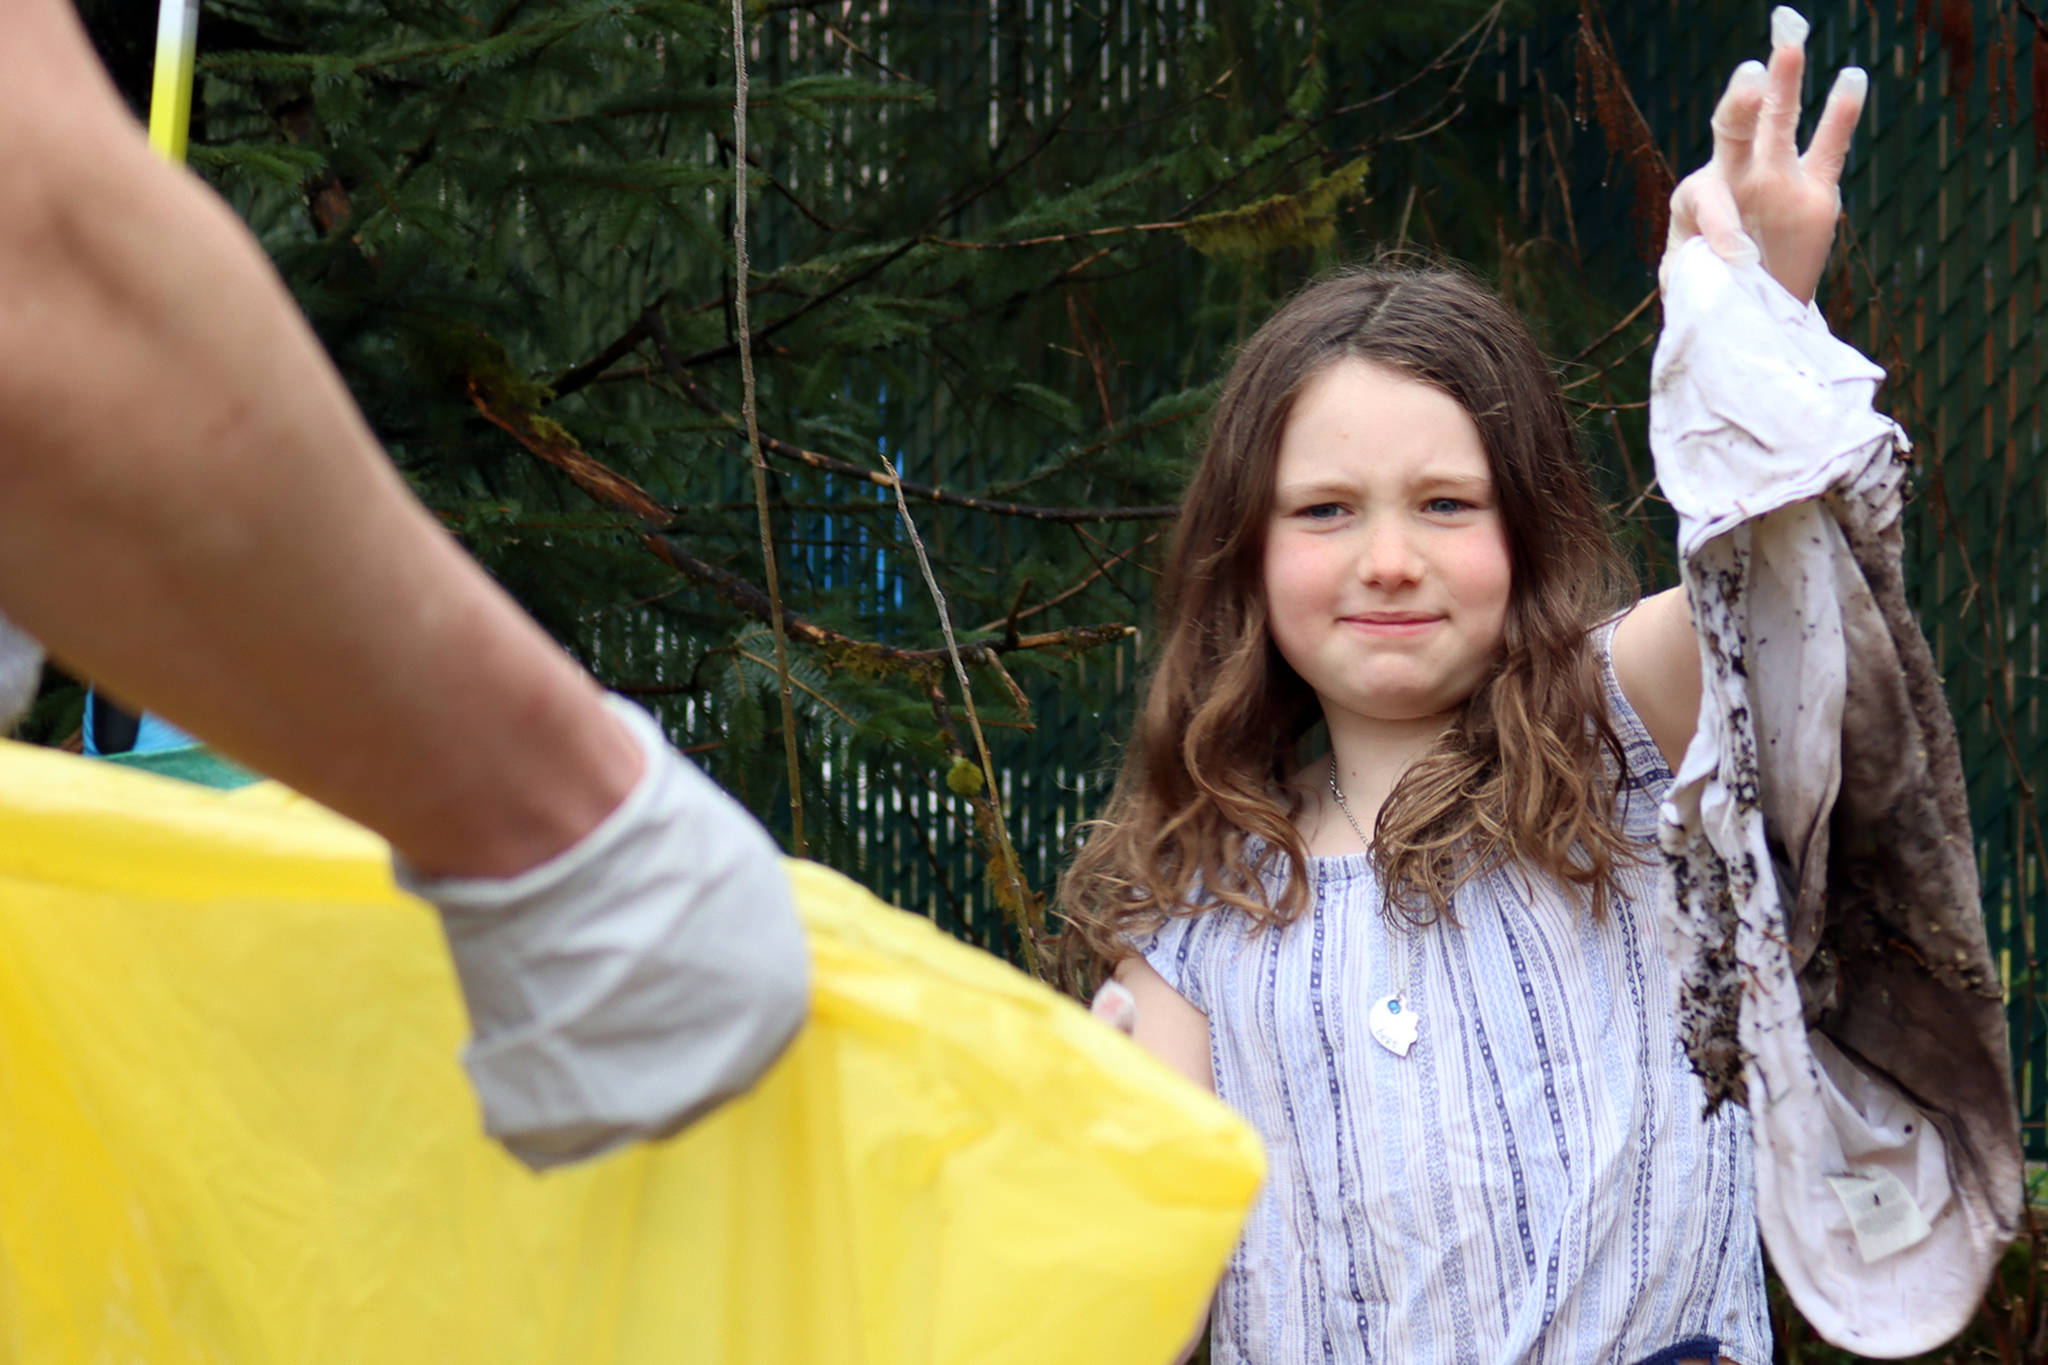 Nora Baldwin, 8, a member of Girl Scout Troop 4009 carries a dirty shirt found on the side of Mendenhall Loop Road in between gloved fingers toward a litter bag on Saturday, May 1, 2021. (Ben Hohenstatt / Juneau Empire)